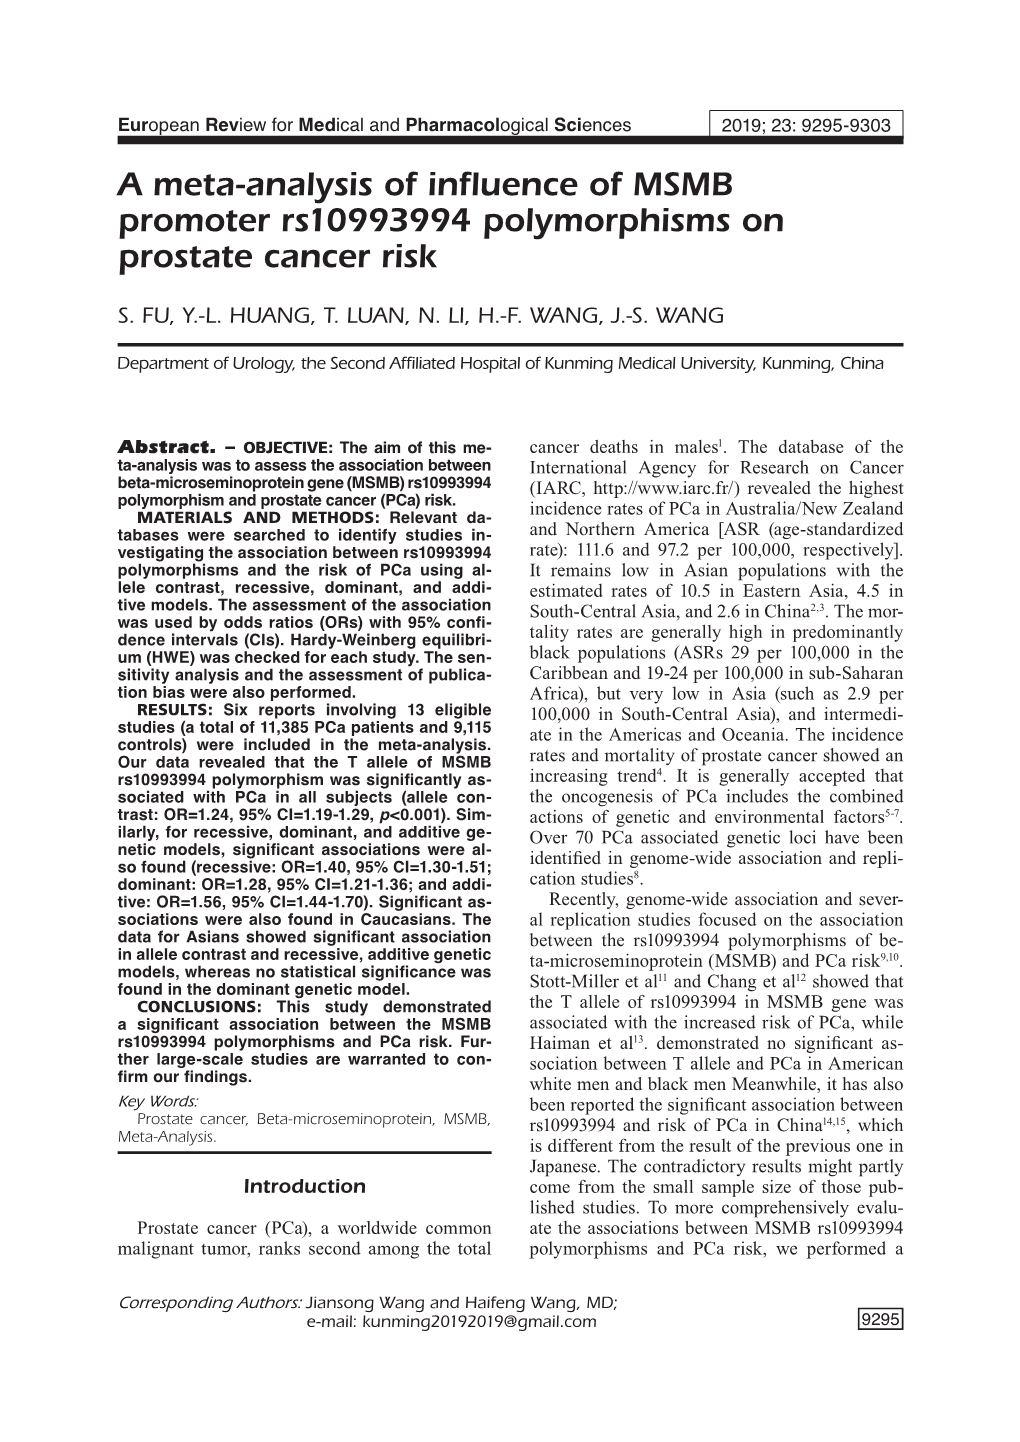 A Meta-Analysis of Influence of MSMB Promoter Rs10993994 Polymorphisms on Prostate Cancer Risk